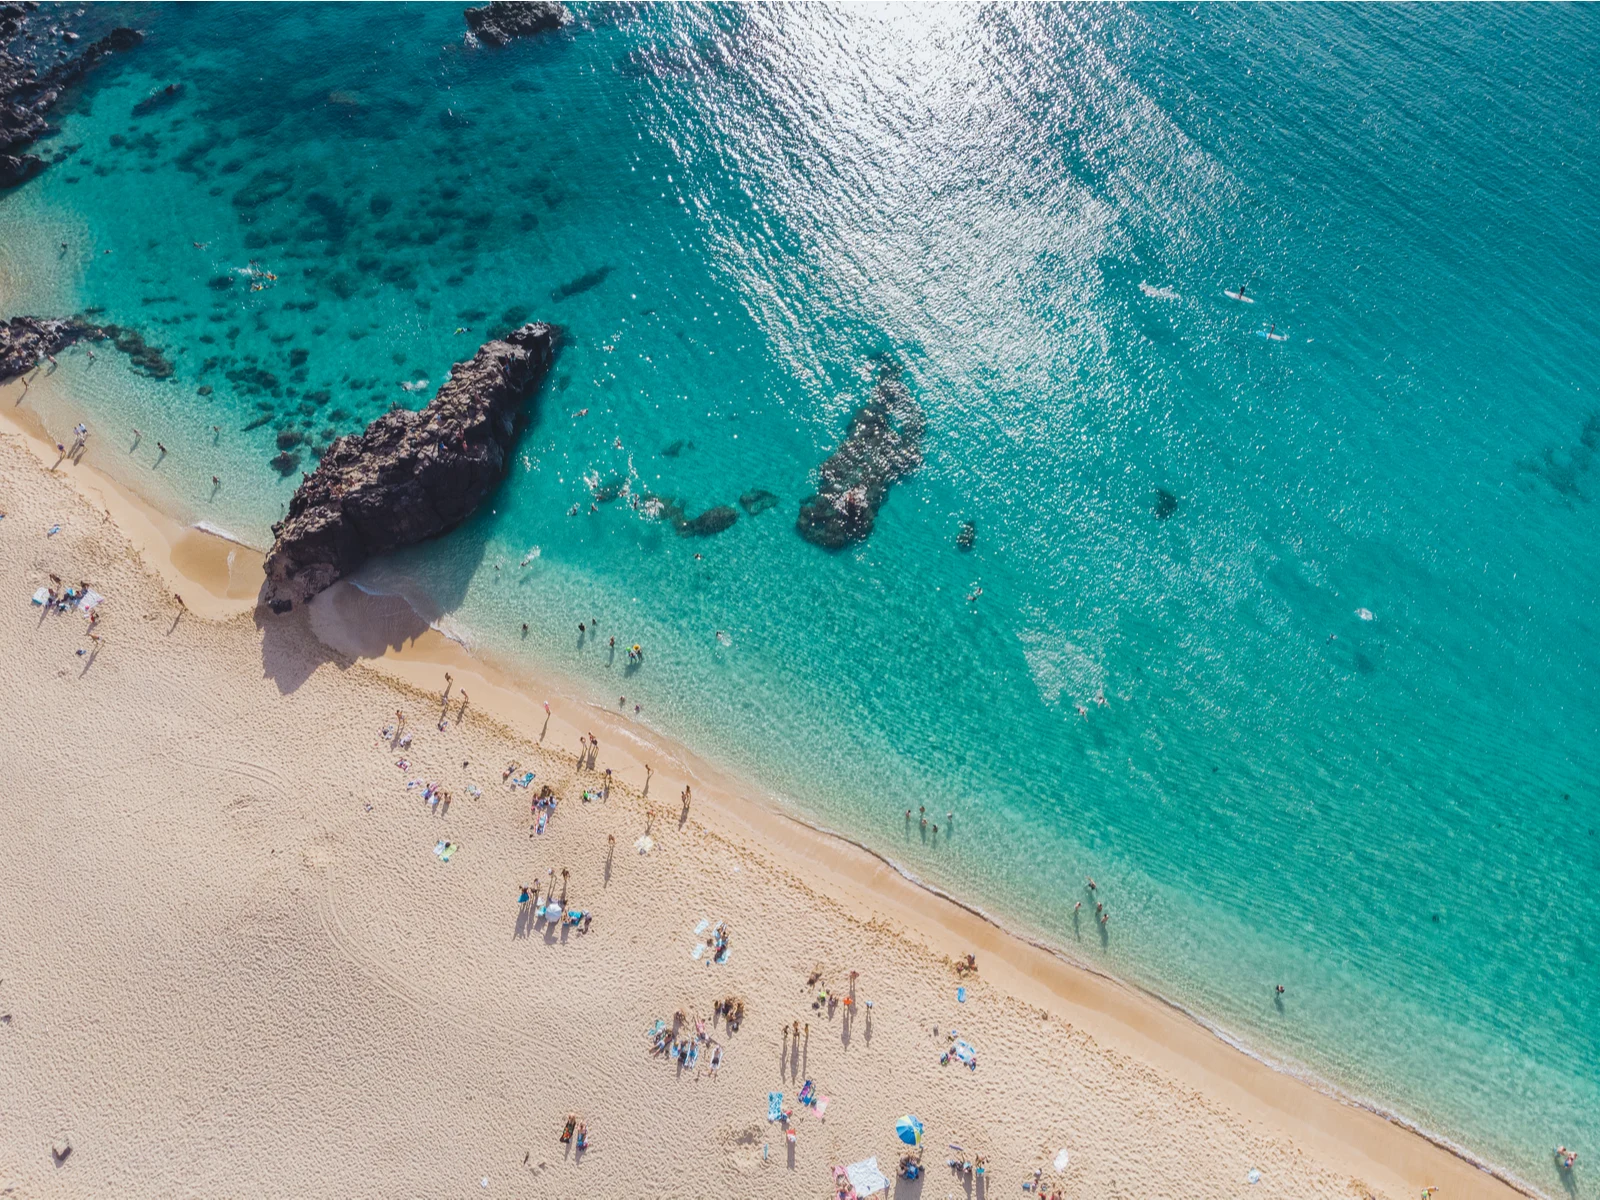 Overhead view on tourists at Waimea Bay, one of the best snorkeling spots in Hawaii. where some are on the sand, others snorkeling, and paddle boarding the turquoise waters